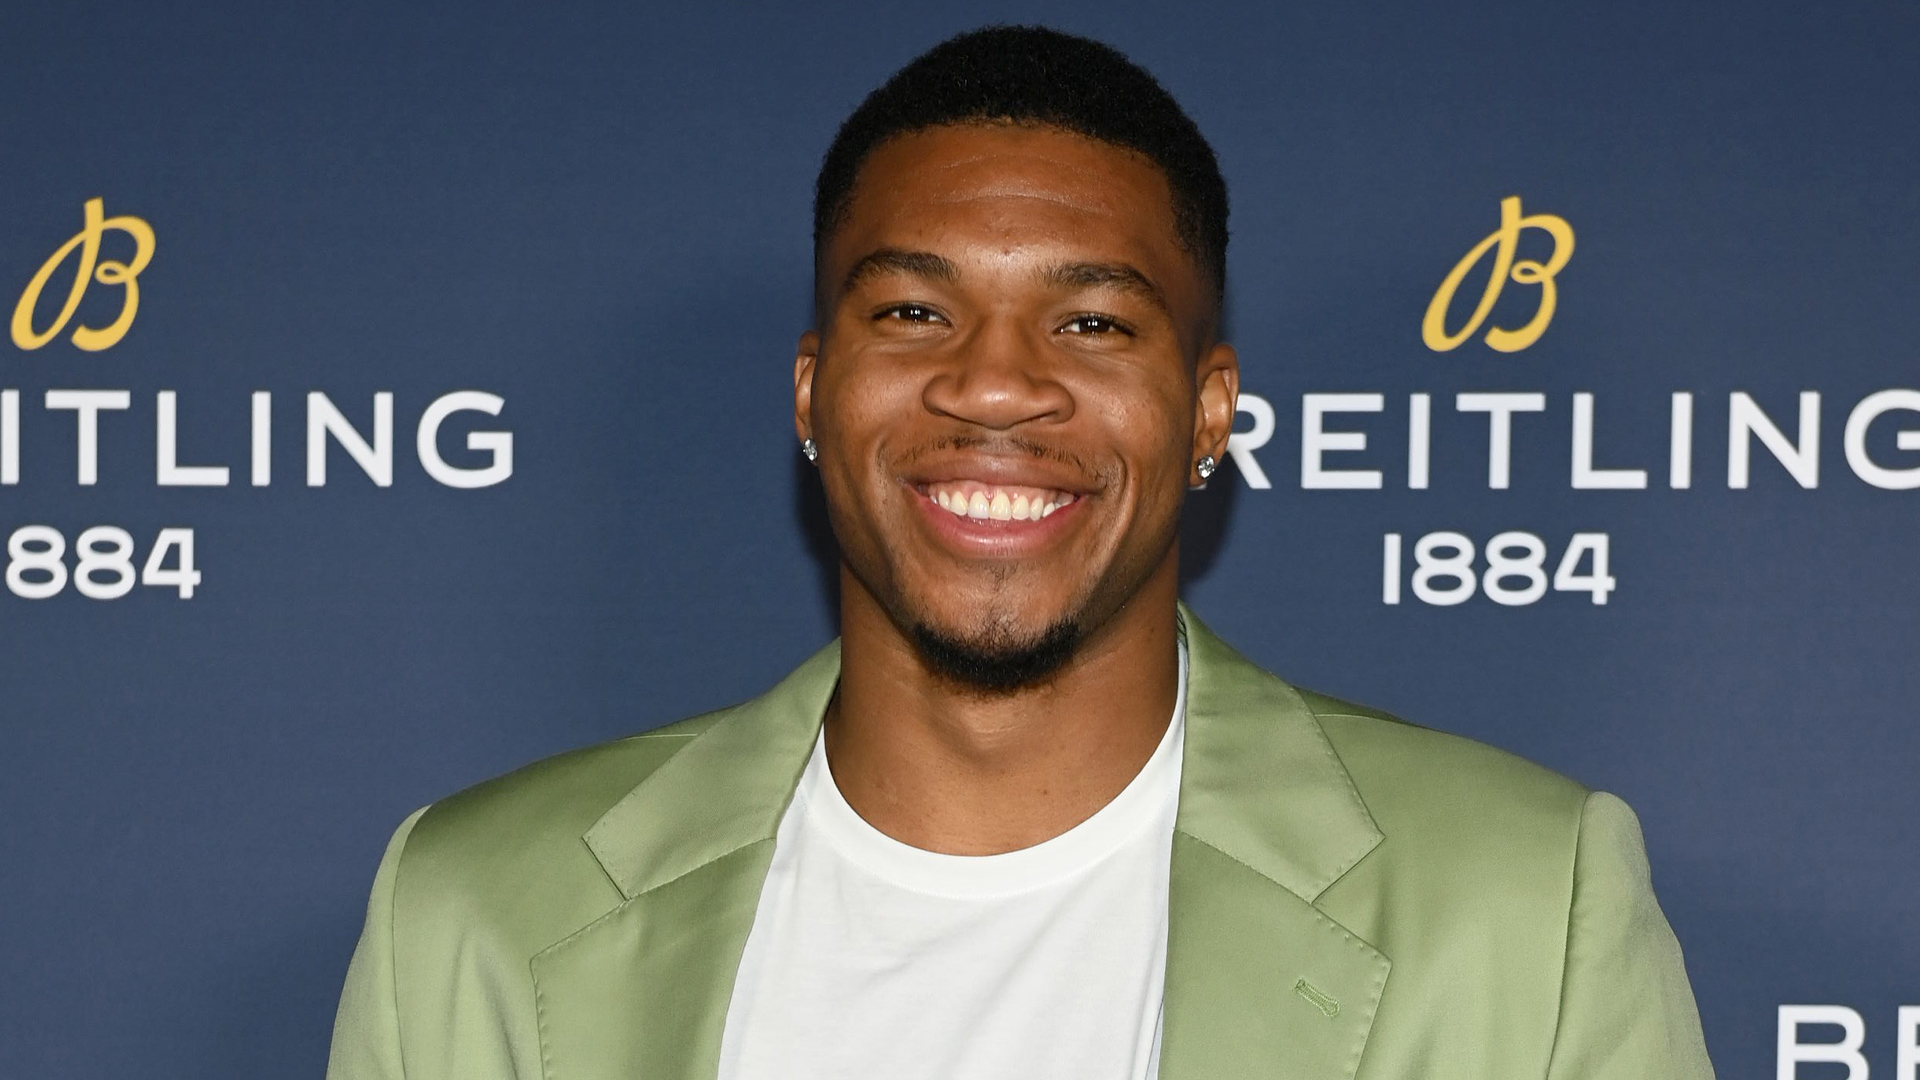 Giannis Antetokounmpo Co-Founds Media Company Improbable Media With Former NBA Star Jay Williams